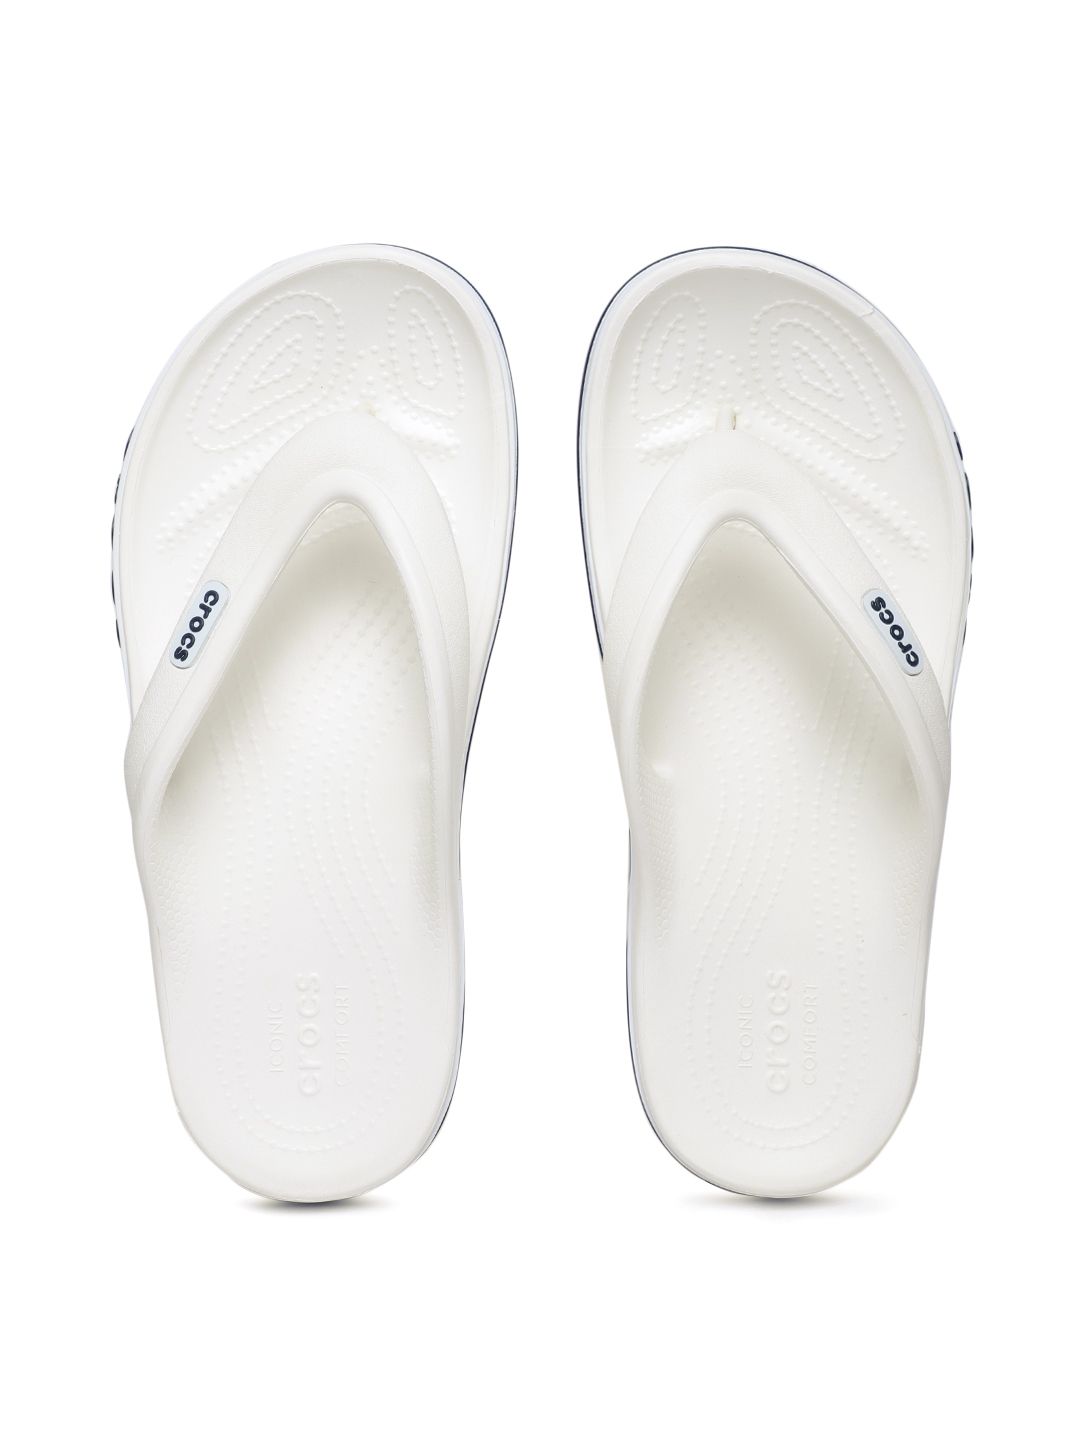 Crocs Unisex White Solid Thong Flip-Flops Price in India